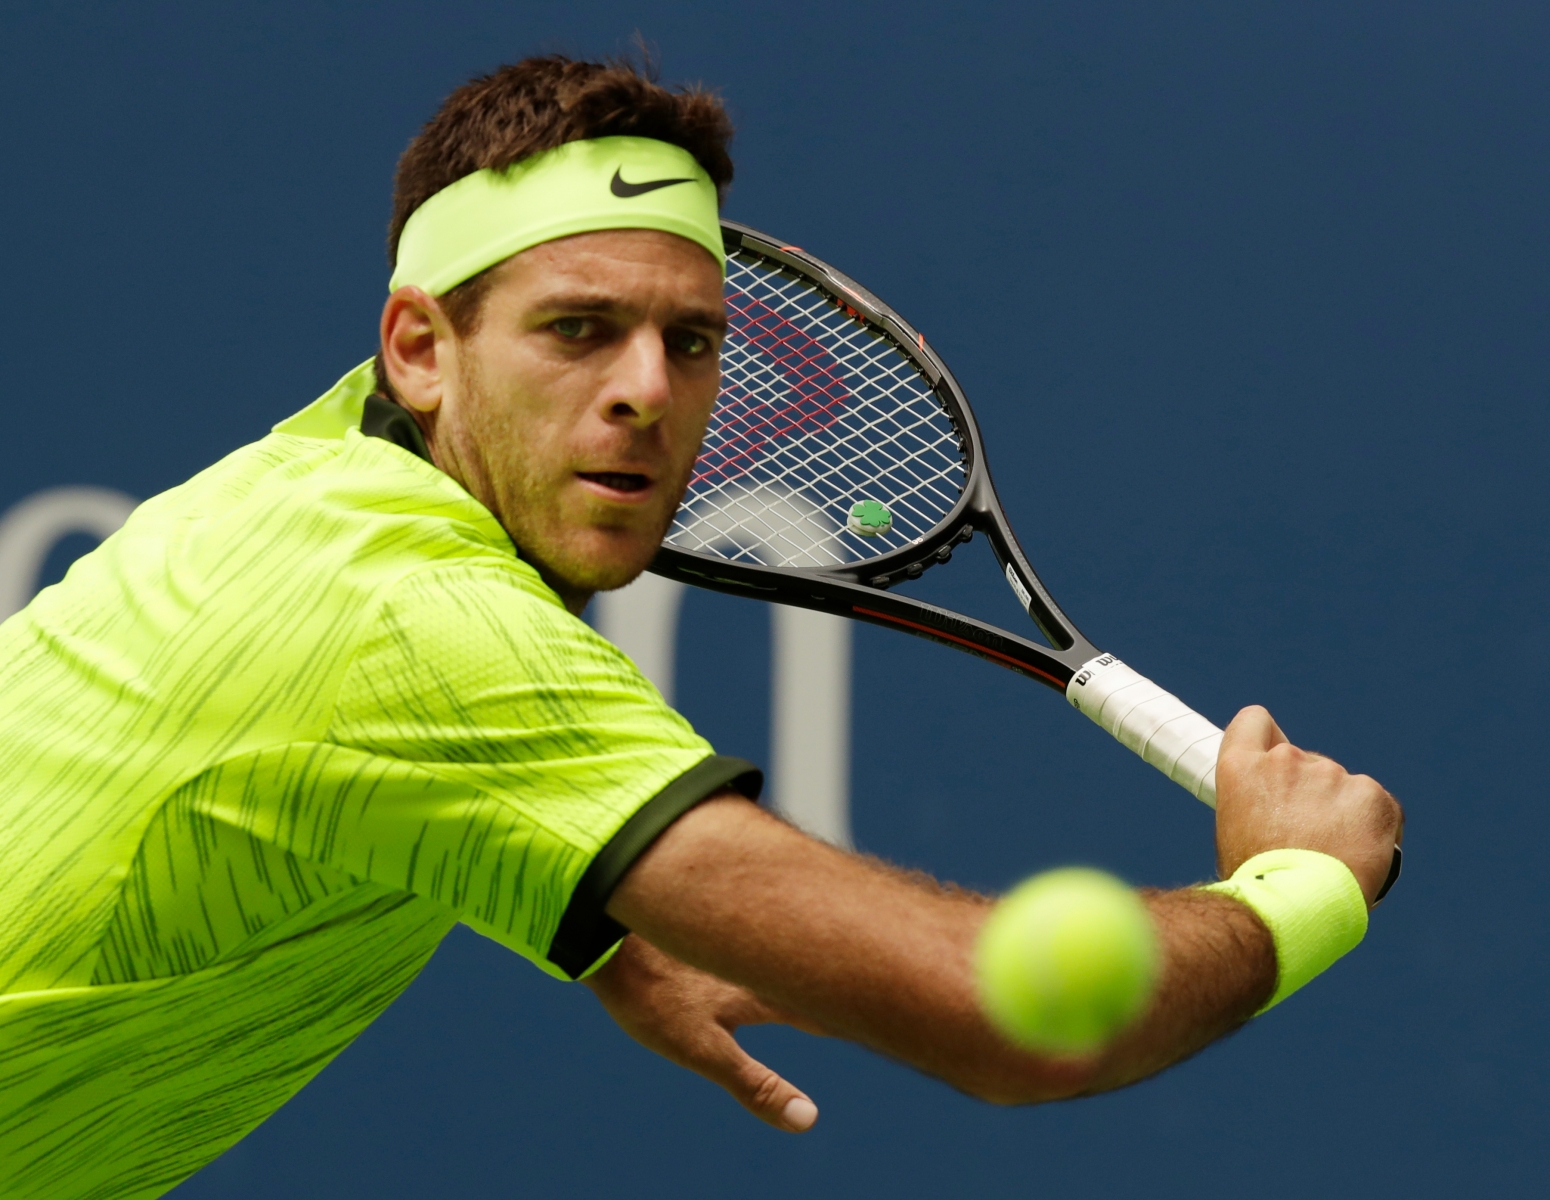 Juan Martin del Potro, of Argentina, returns a shot to Dominic Thiem, of Austria, during the fourth round of the U.S. Open tennis tournament, Monday, Sept. 5, 2016, in New York. (AP Photo/Charles Krupa) US Open Tennis